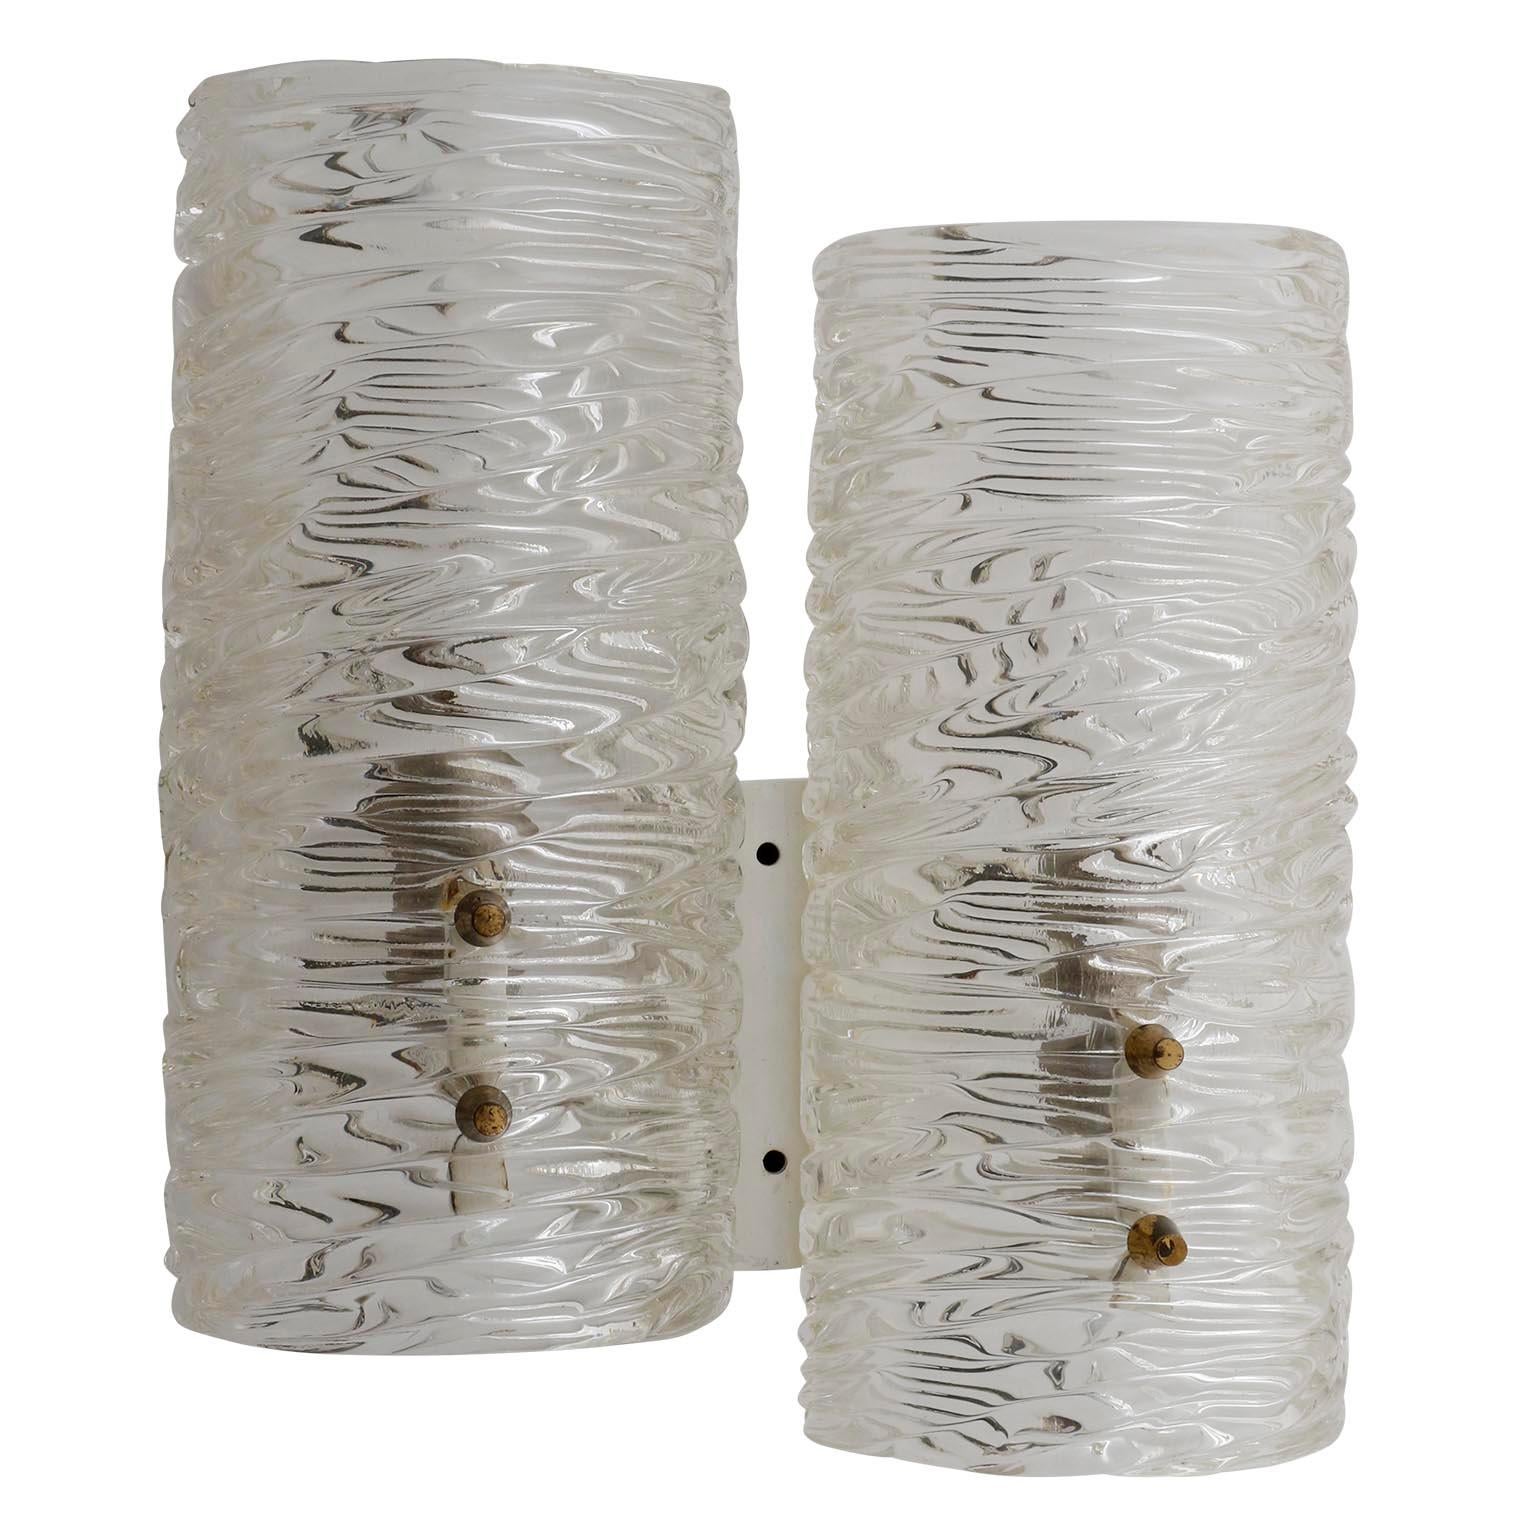 A pair of textured glass wall lamps by J.T. Kalmar, Austria, manufactured in midcentury, circa 1960 (late 1950s or early 1960s).
Two half round curved glasses are mounted with cone shaped brass bolts on a white enameled backplate.
Each sconce has